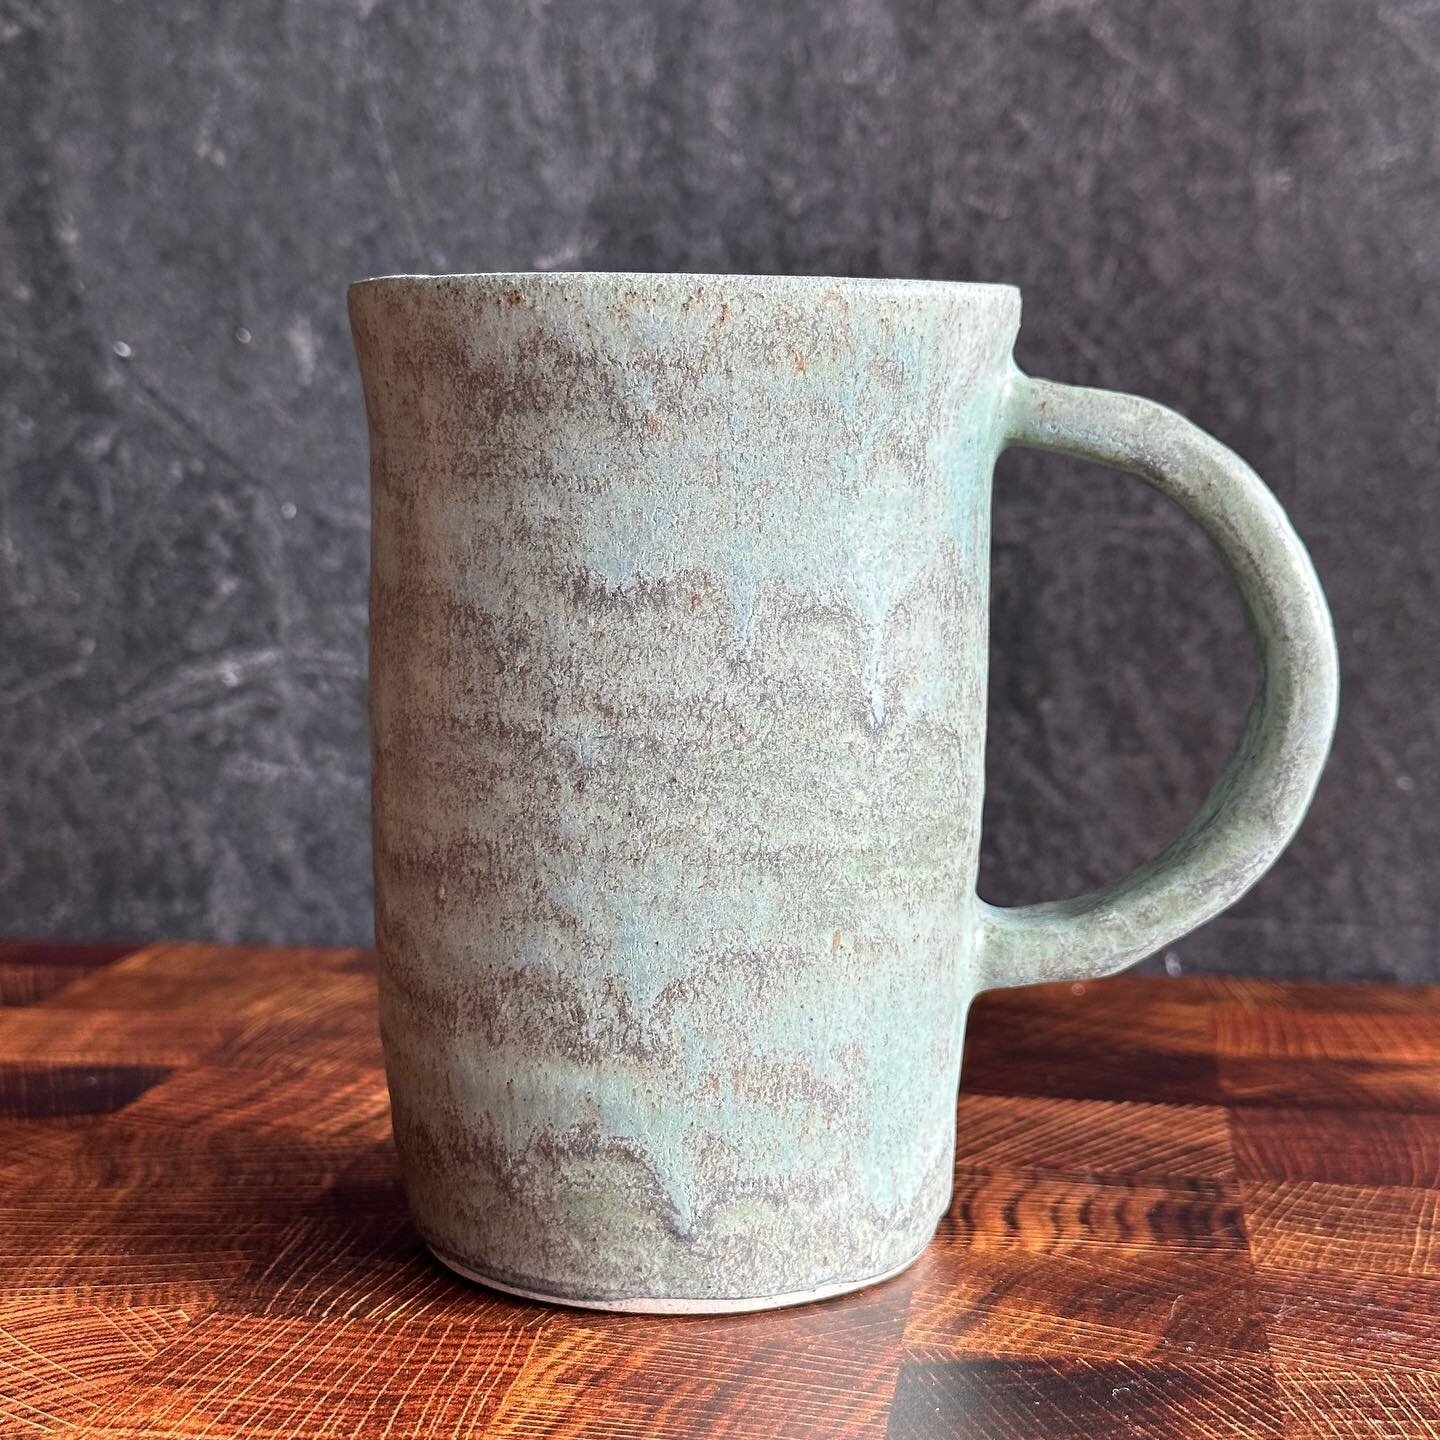 Your new favorite mug is waiting for you. ⁣
⁣
Come meet her at our grand reopening this Friday from 5-8.